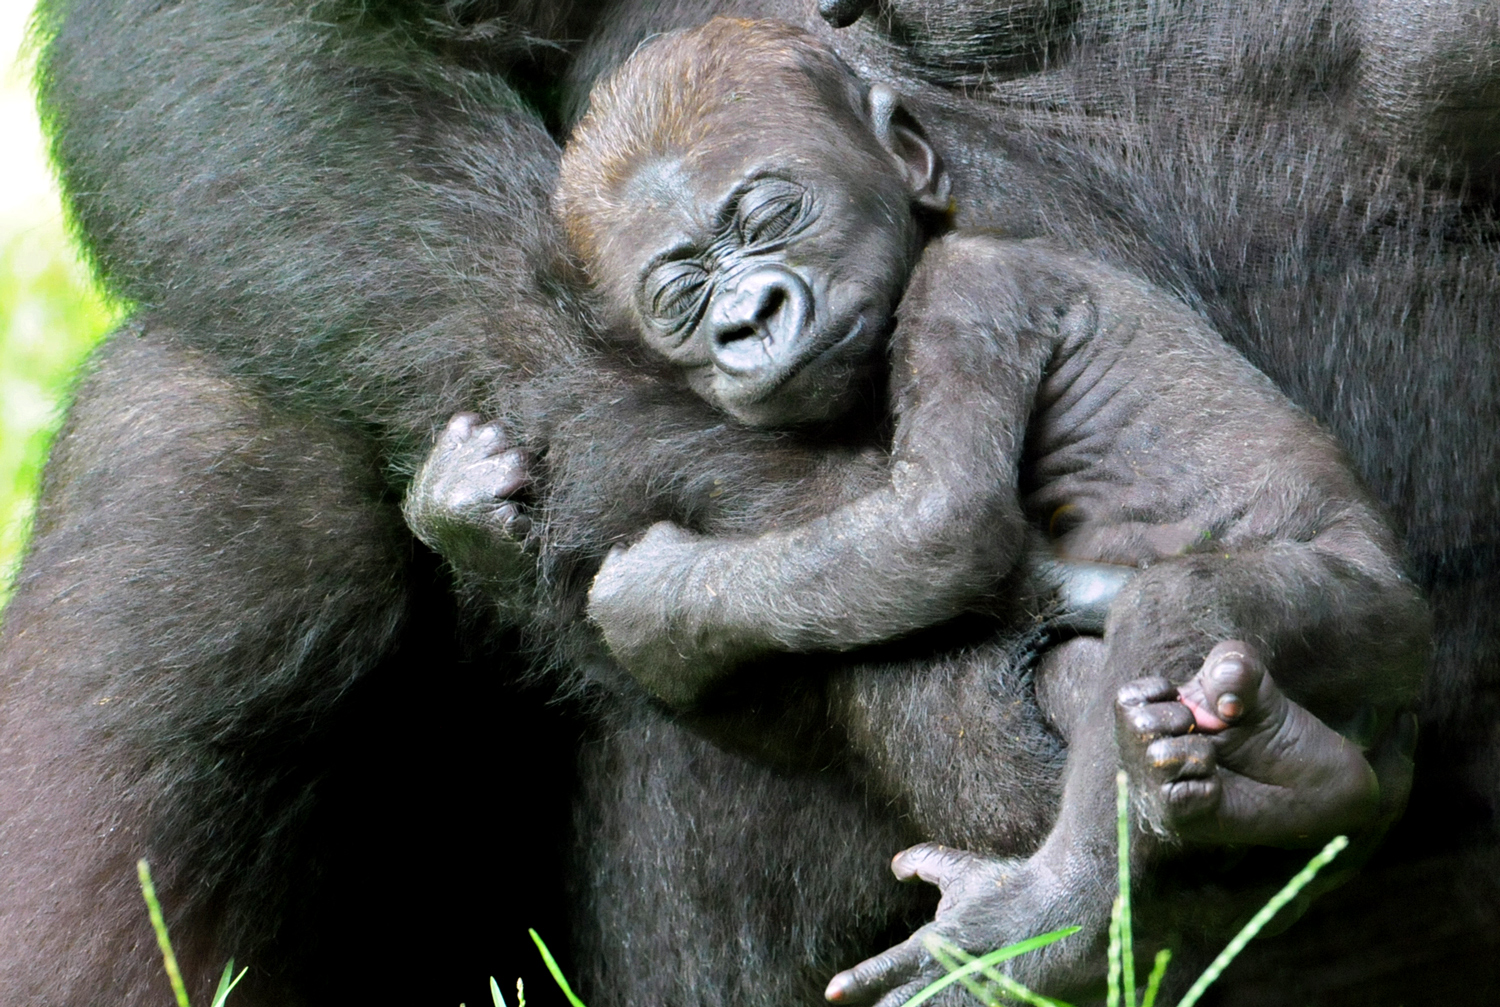 A baby gorilla sleeps in the arms of an adult gorilla.